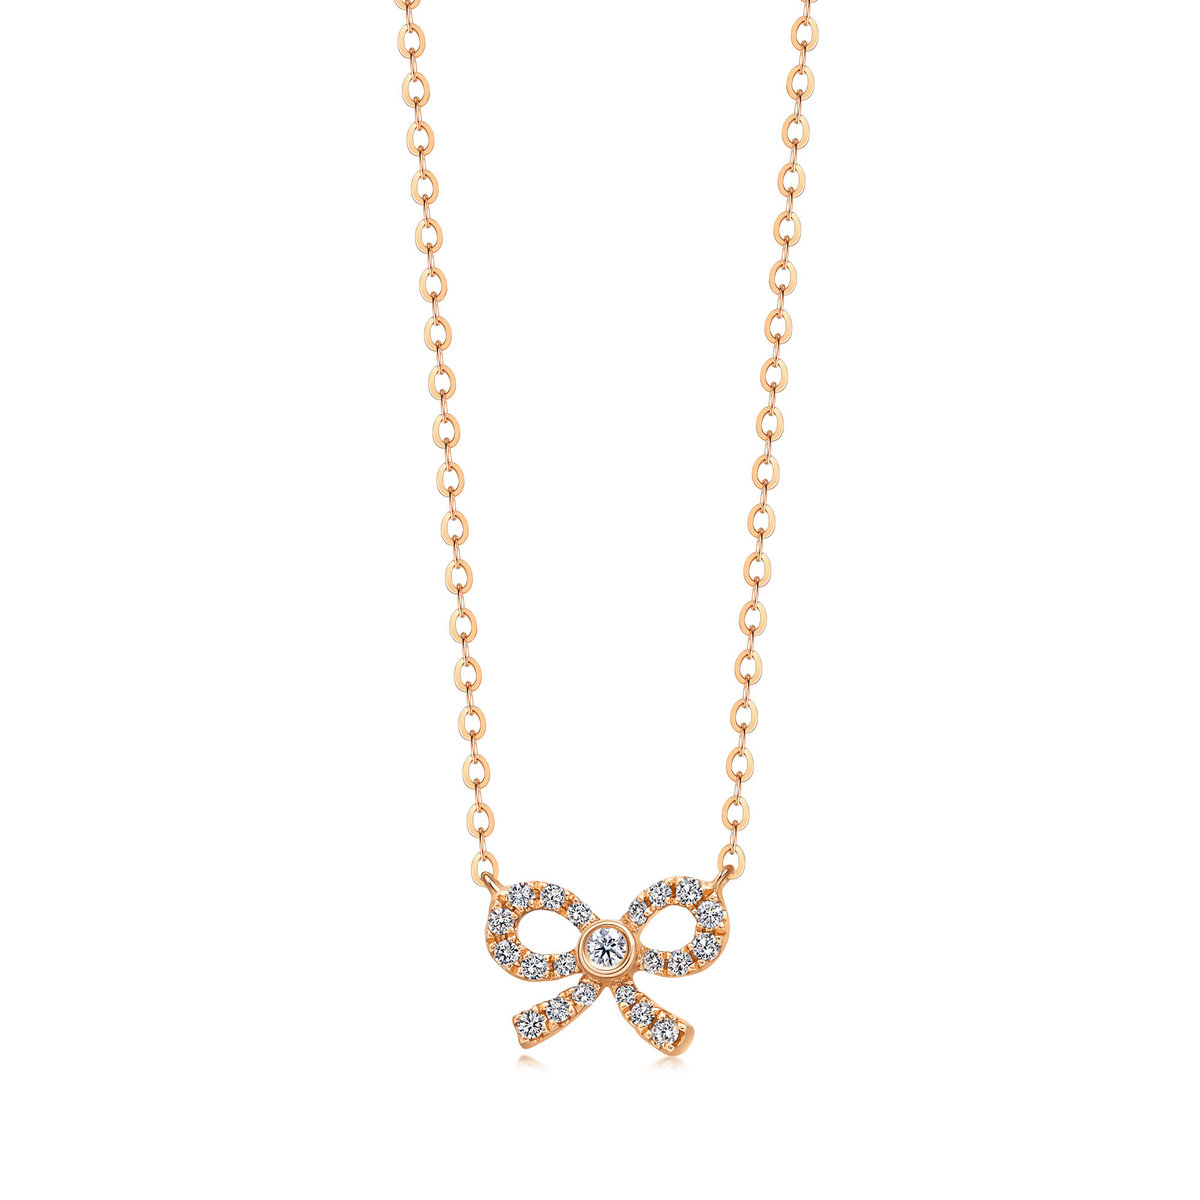 Minty Collection 18K Rose Gold Diamond Bowtie Necklace